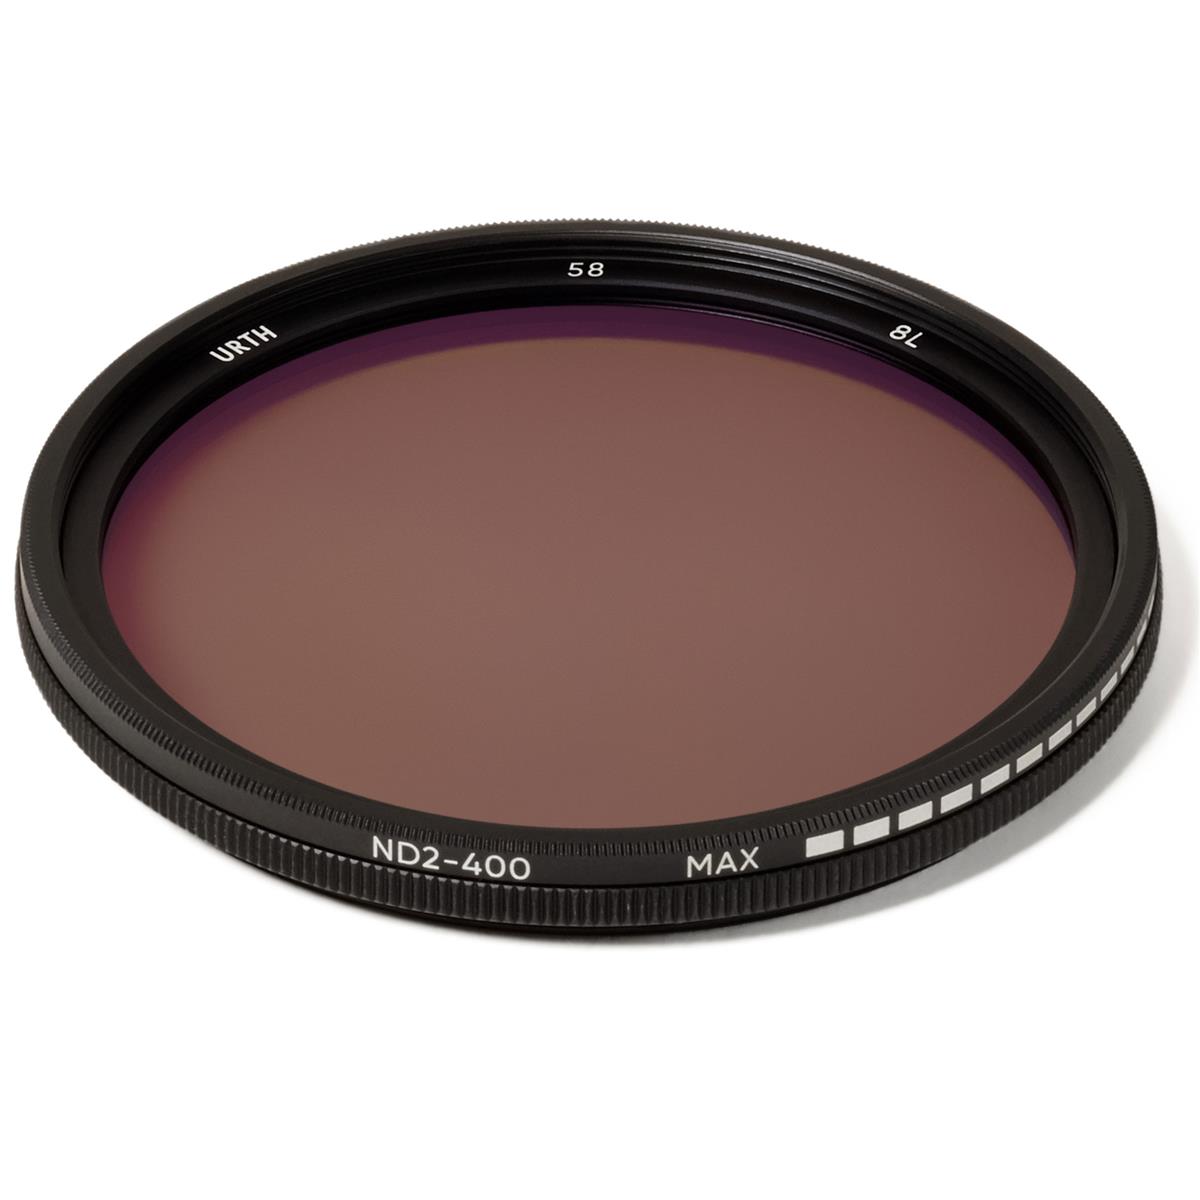 Urth 58mm Circular Variable ND2-400 1-8.6 Stop Lens Filter #UNDX400ST58